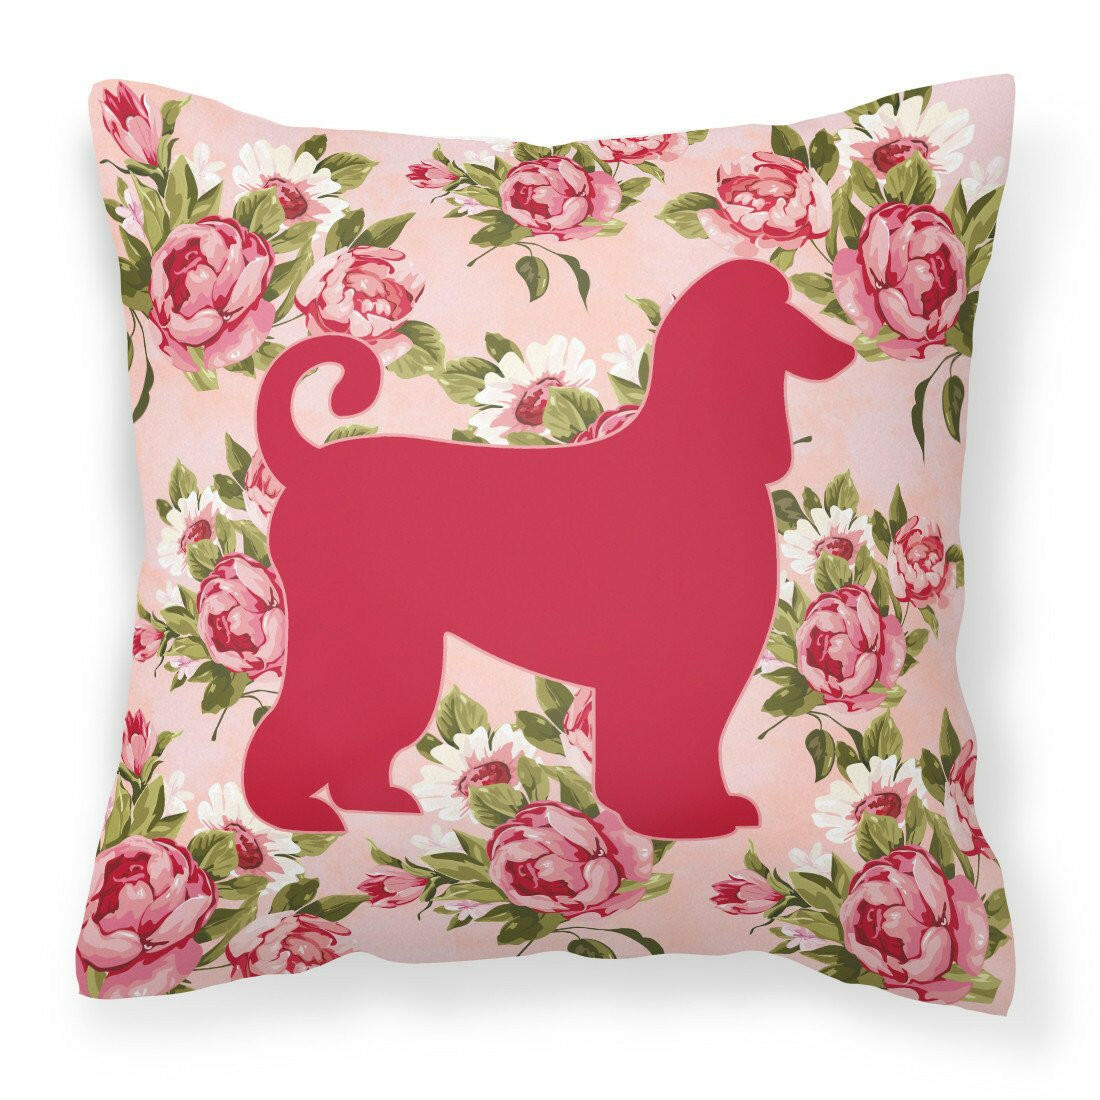 Afghan Hound Shabby Chic Pink Roses  Fabric Decorative Pillow BB1066-RS-PK-PW1414 - the-store.com